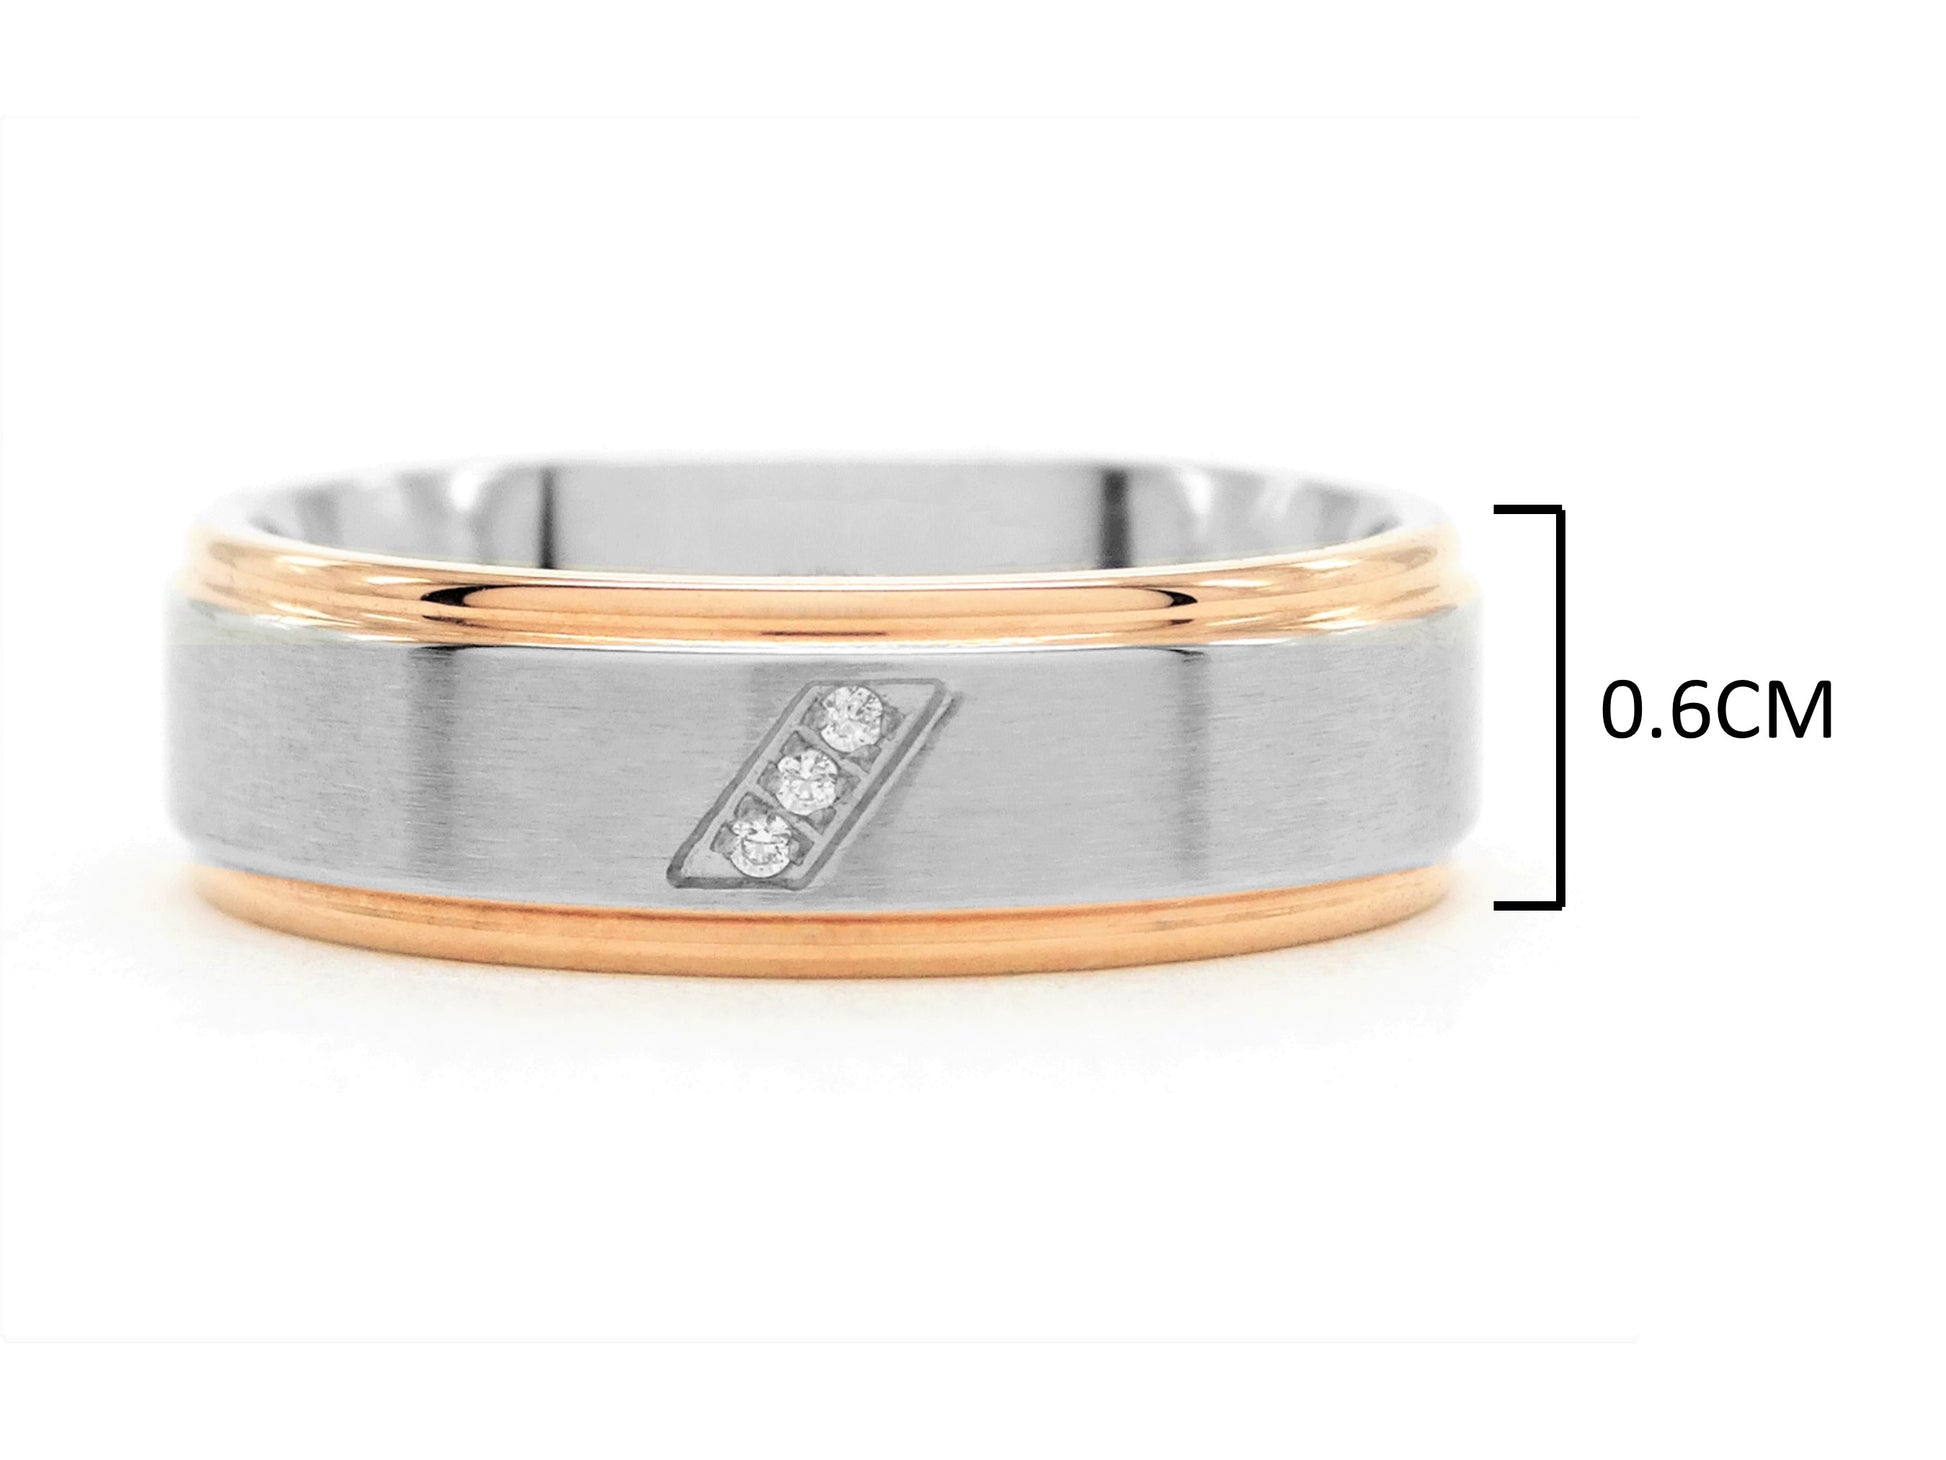 Stainless steel rose gold band ring MEASUREMENT